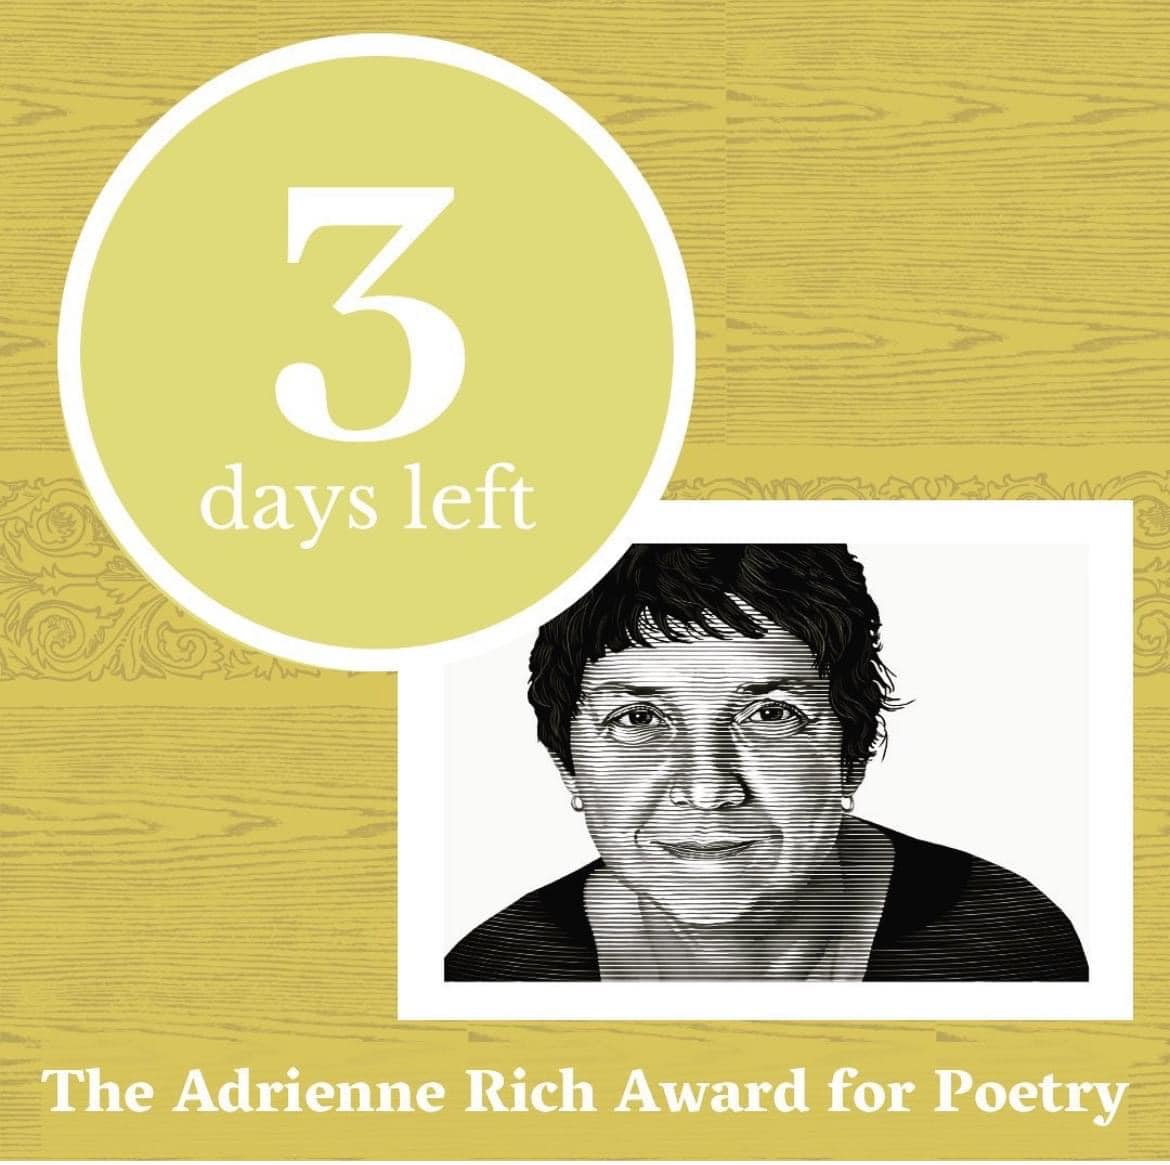 Still plenty of time to send your amazing poems to the BPJ! The Adrienne Rich Award provides a $1,500 prize for a single poem, and all submissions are considered for publication. As always, we offer a fee-free option if the reading fee presents a hardship. bpj.org/submit/rich-aw…